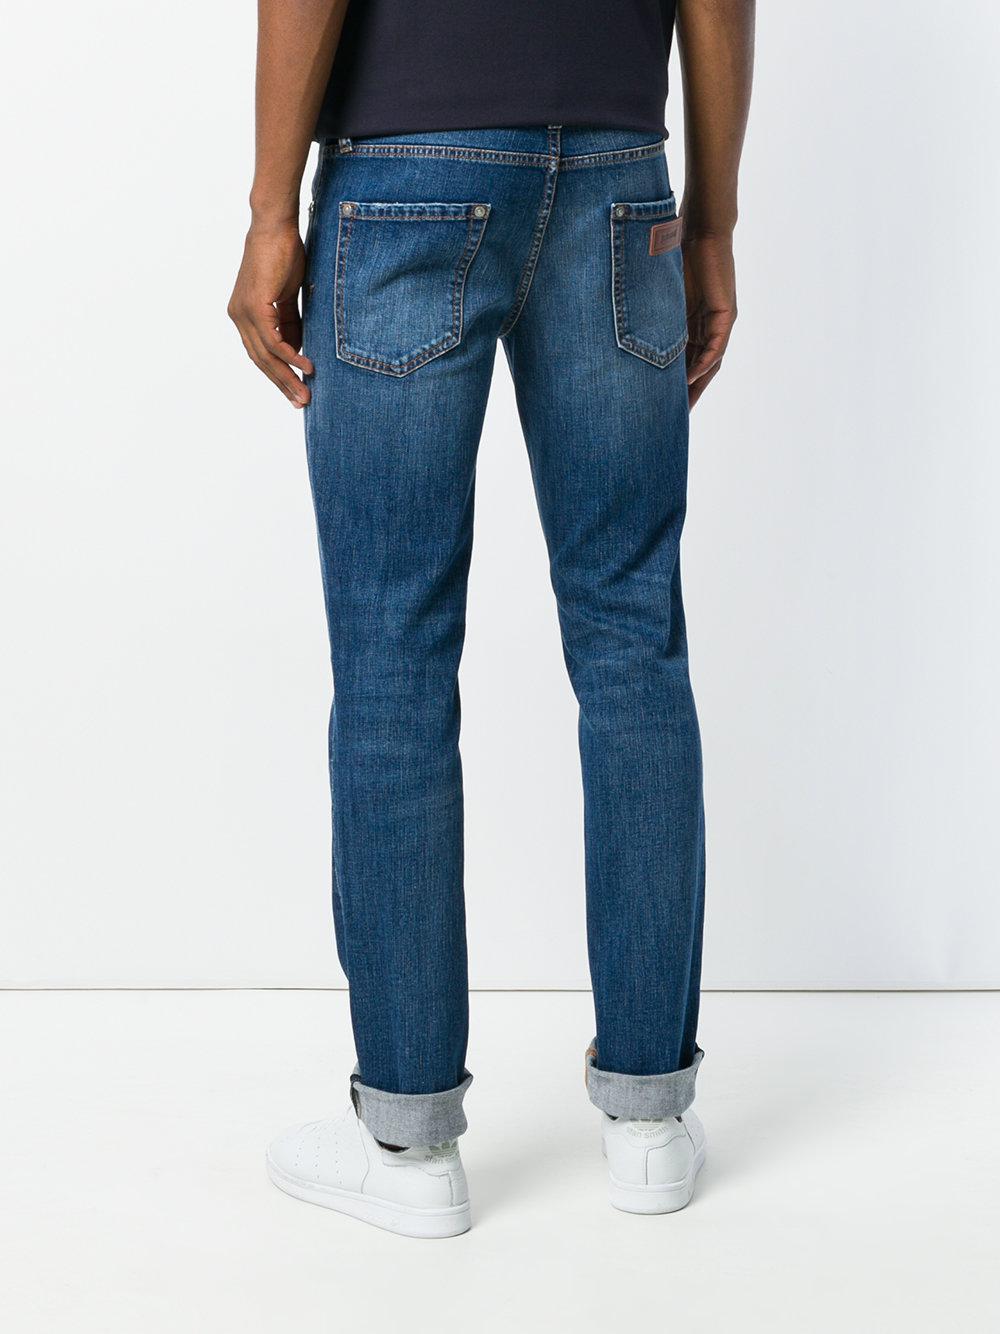 Lyst - Just Cavalli Casual Slim Fit Jeans in Blue for Men